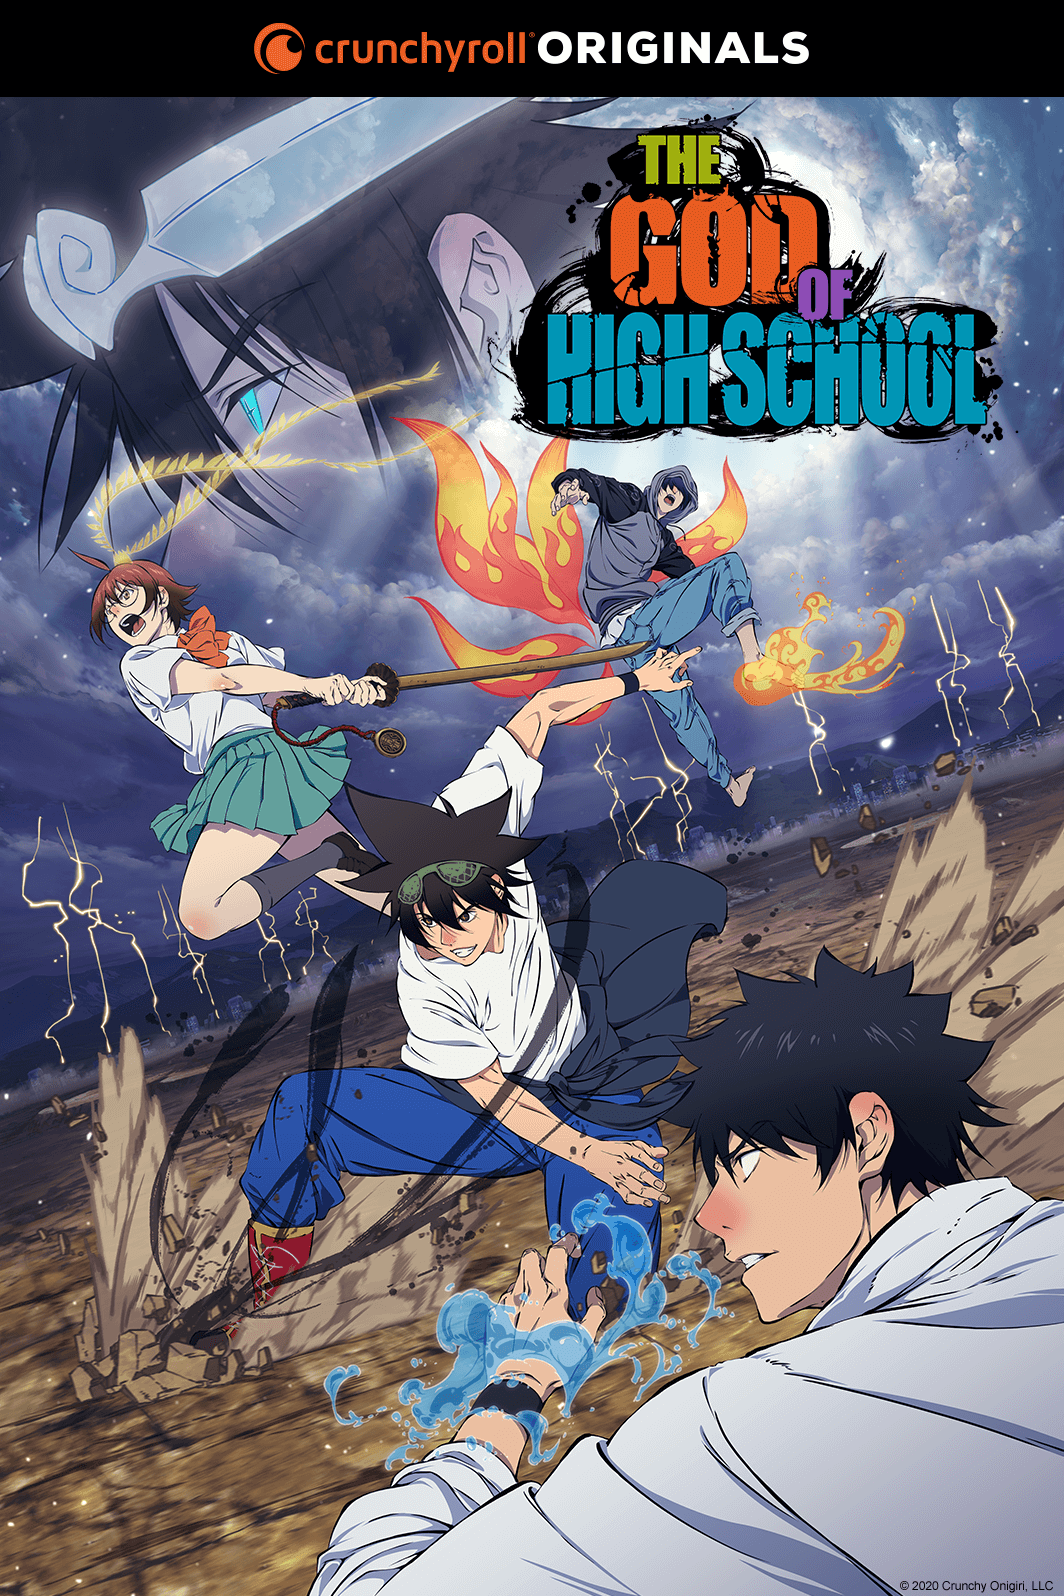 God of High School anime premieres on July 6th, key art and final